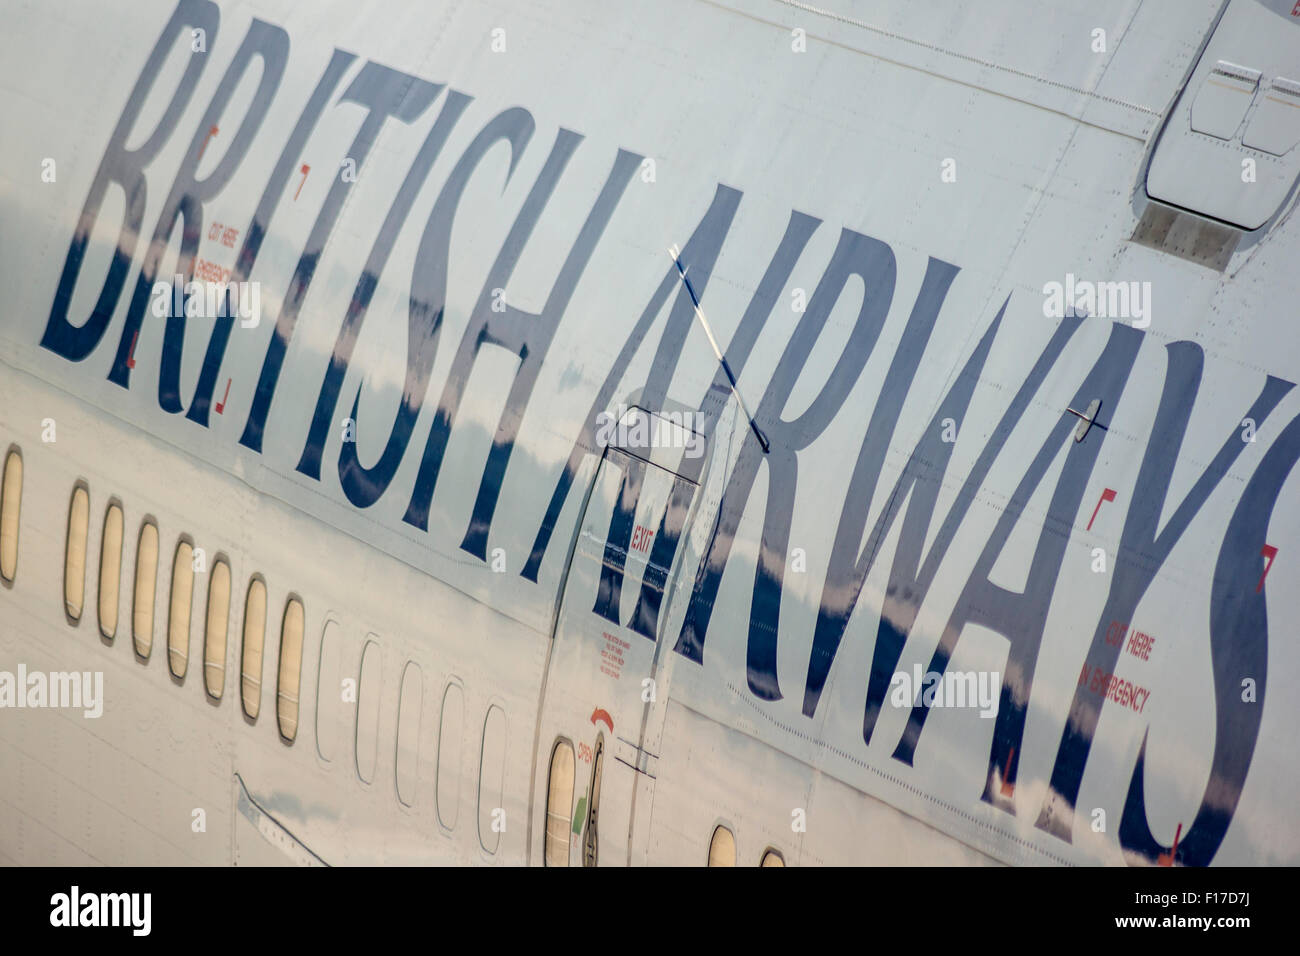 British Airways logo on the side of a Boeing 747 Stock Photo